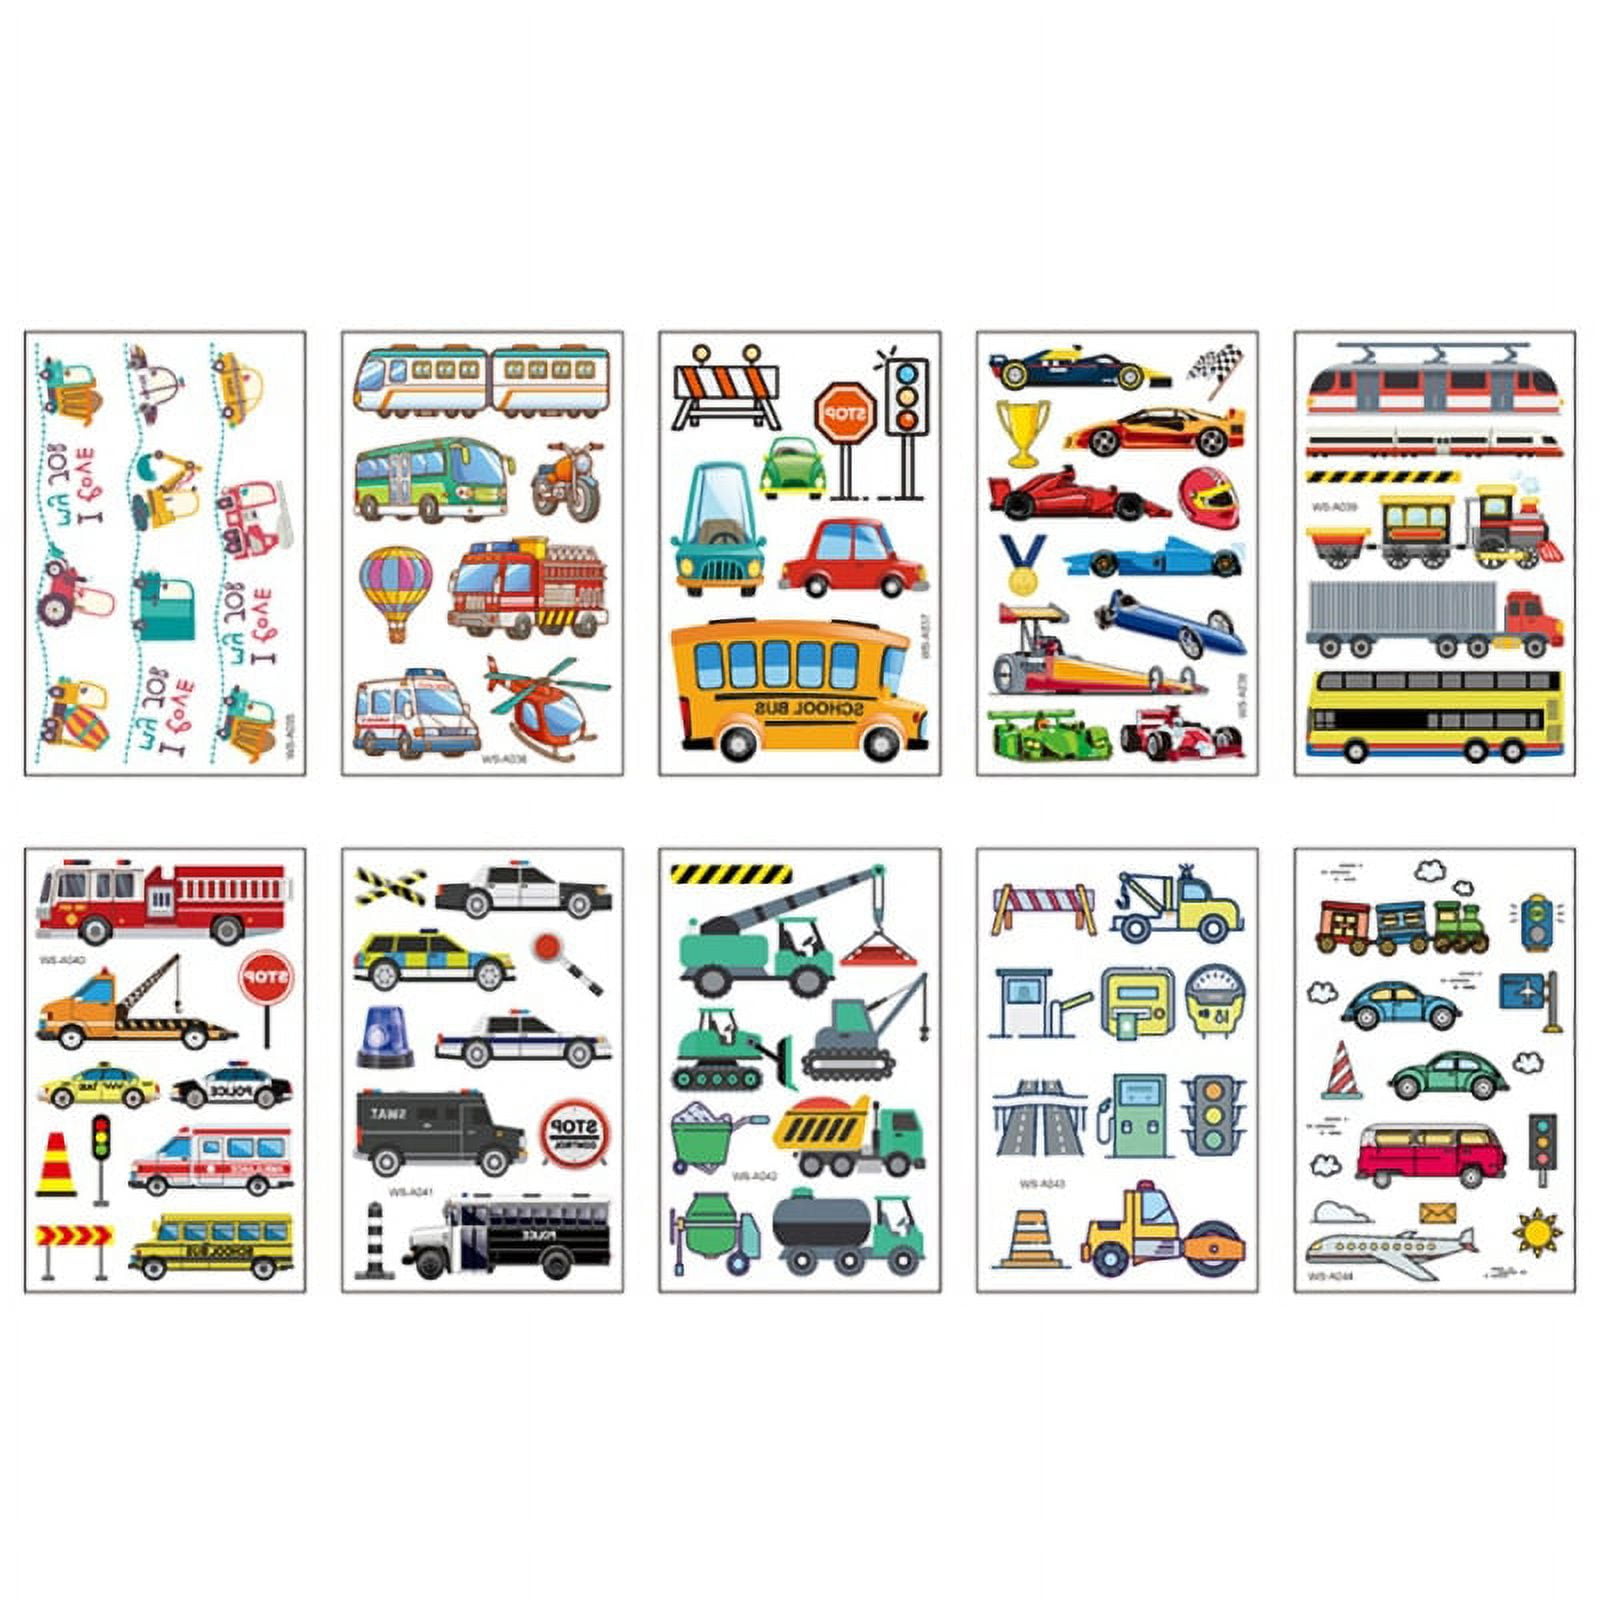 Stickers for Kids 1900+, 80 Different Sheets, 3D Puffy Stickers